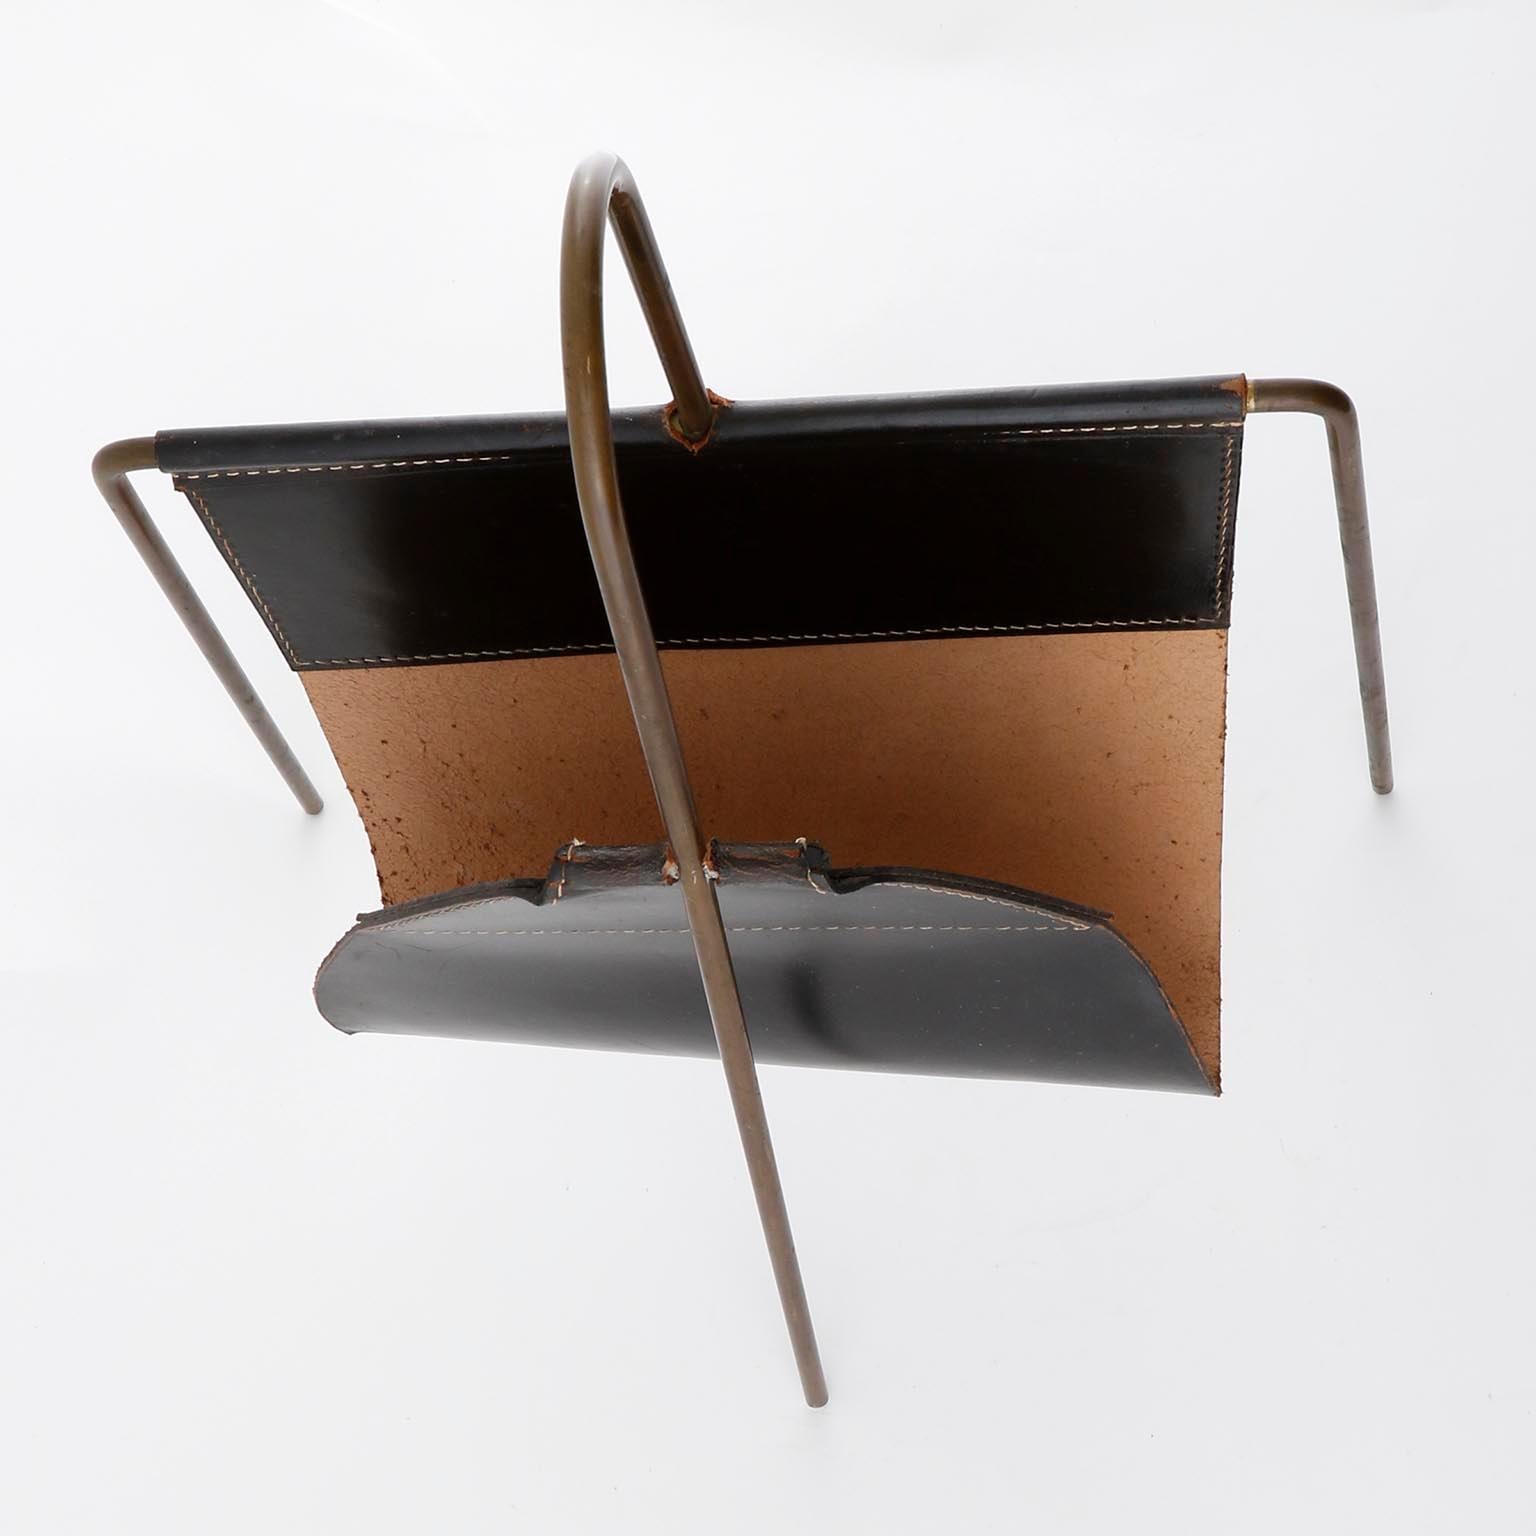 Carl Auböck Magazine Rack No. 4102, Patinated Brass Leather, 1950 In Good Condition For Sale In Hausmannstätten, AT